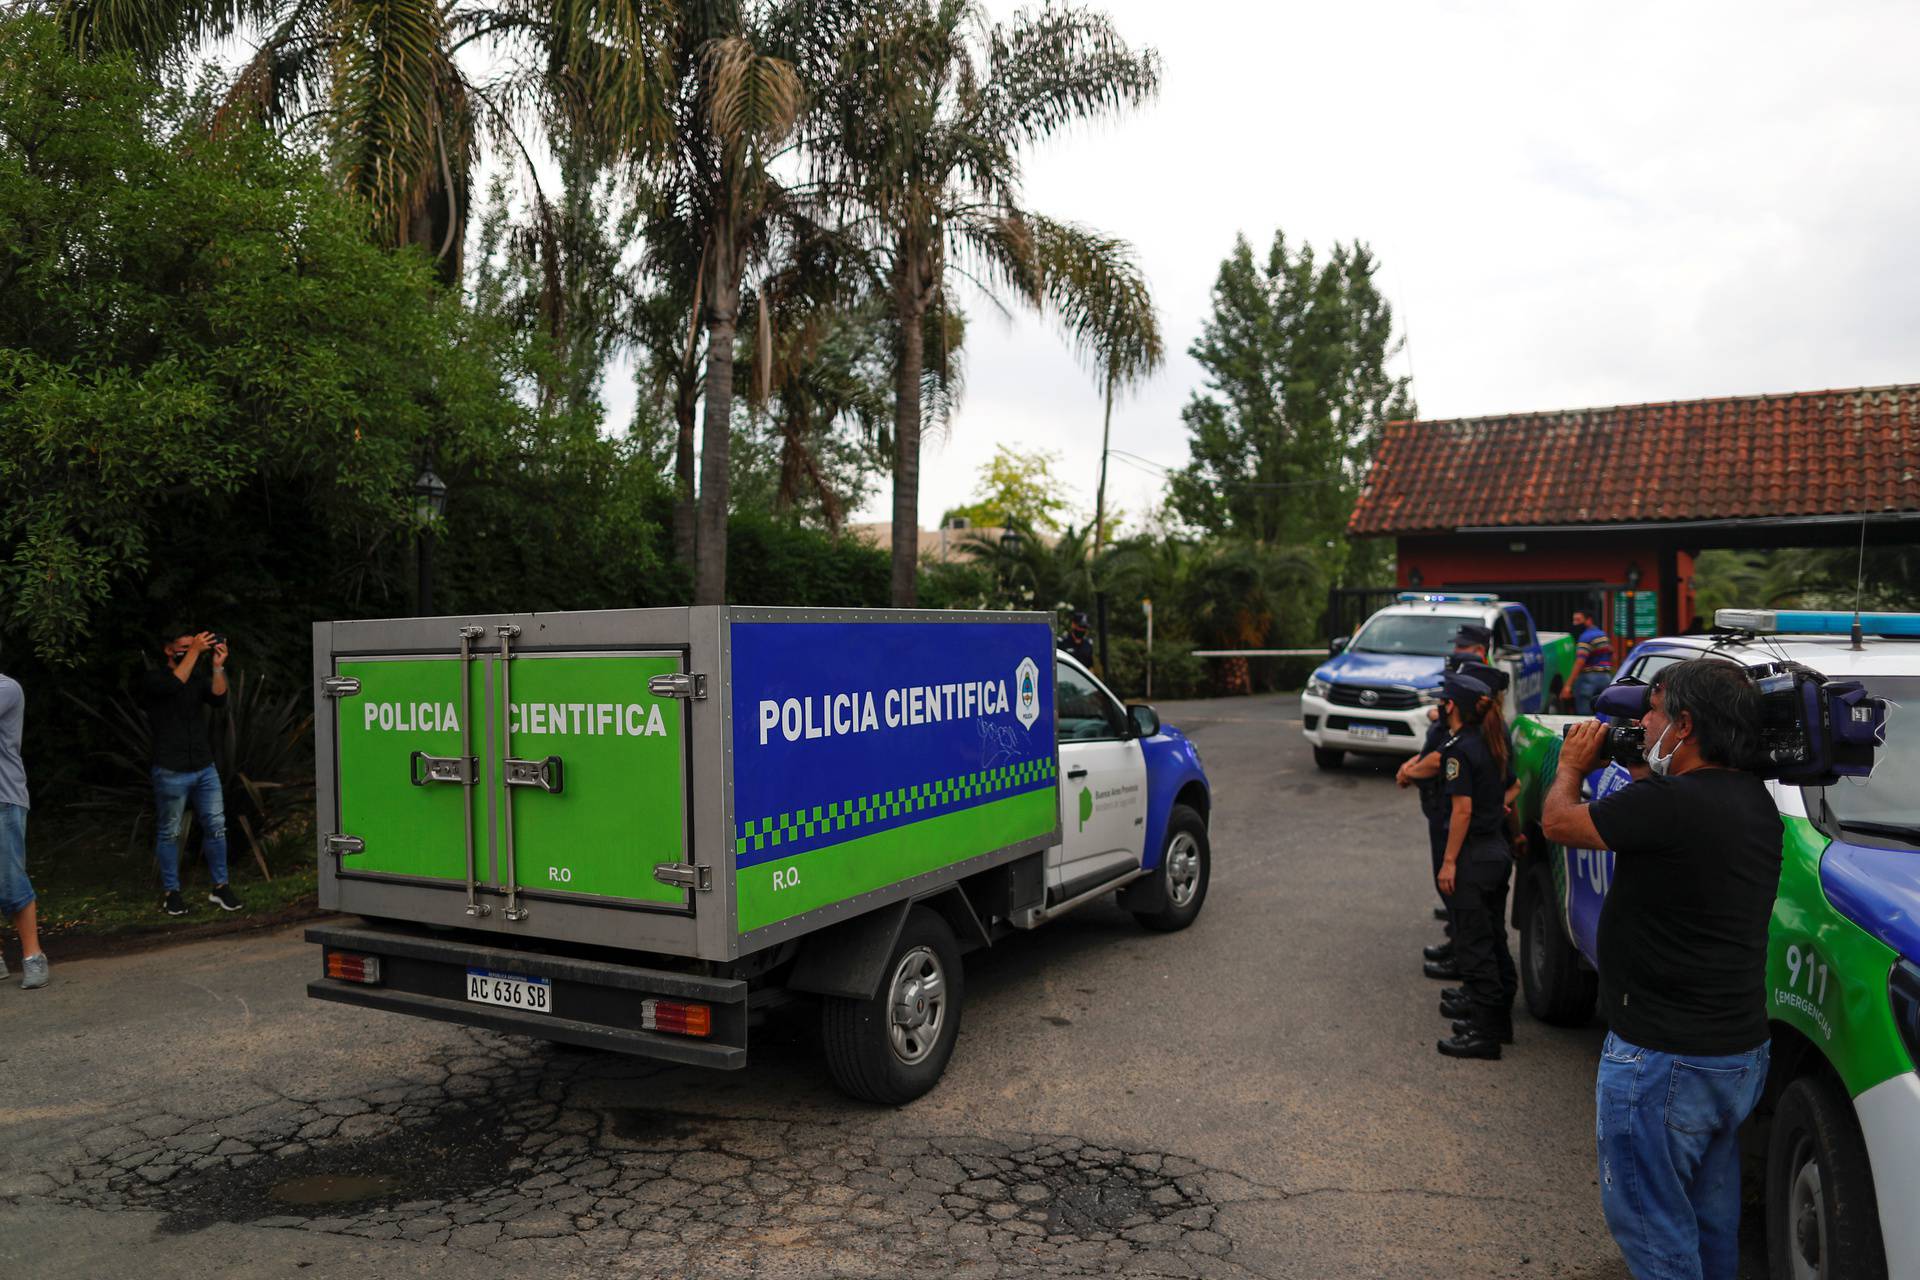 Scientific police arrives at the house where Diego Maradona was staying, in Tigre